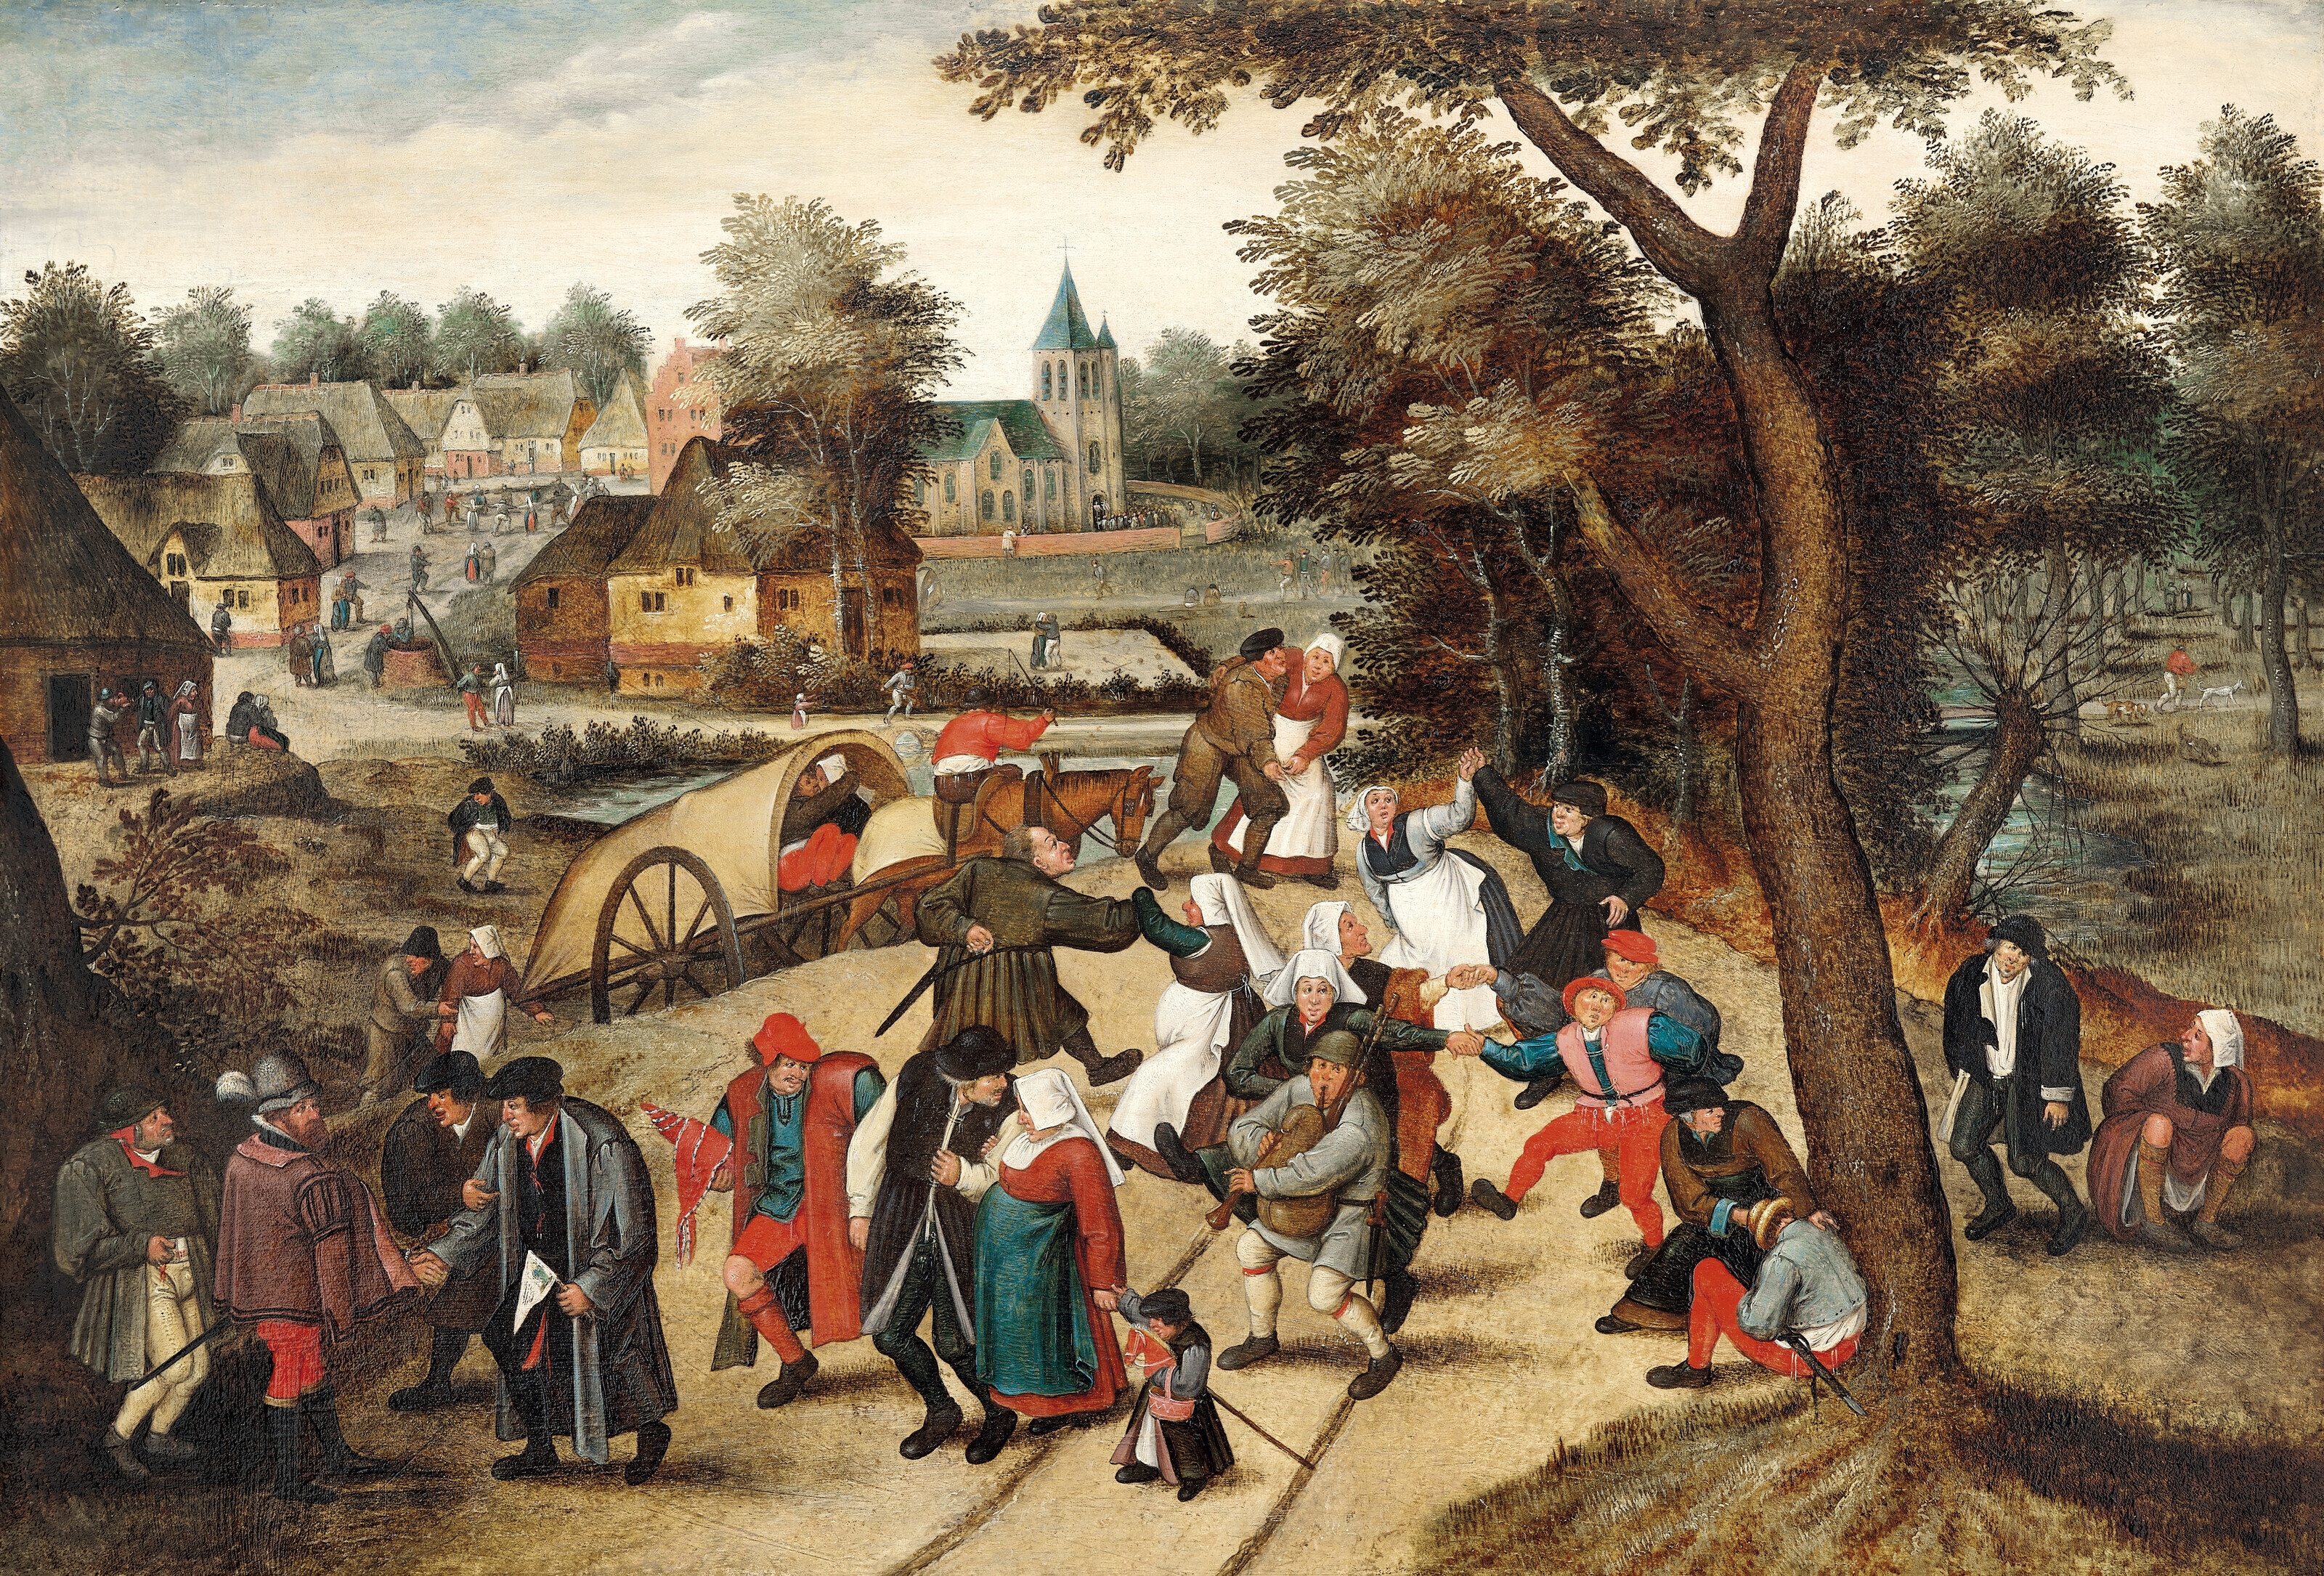 Return from the Kermesse by Pieter Brueghel the Younger